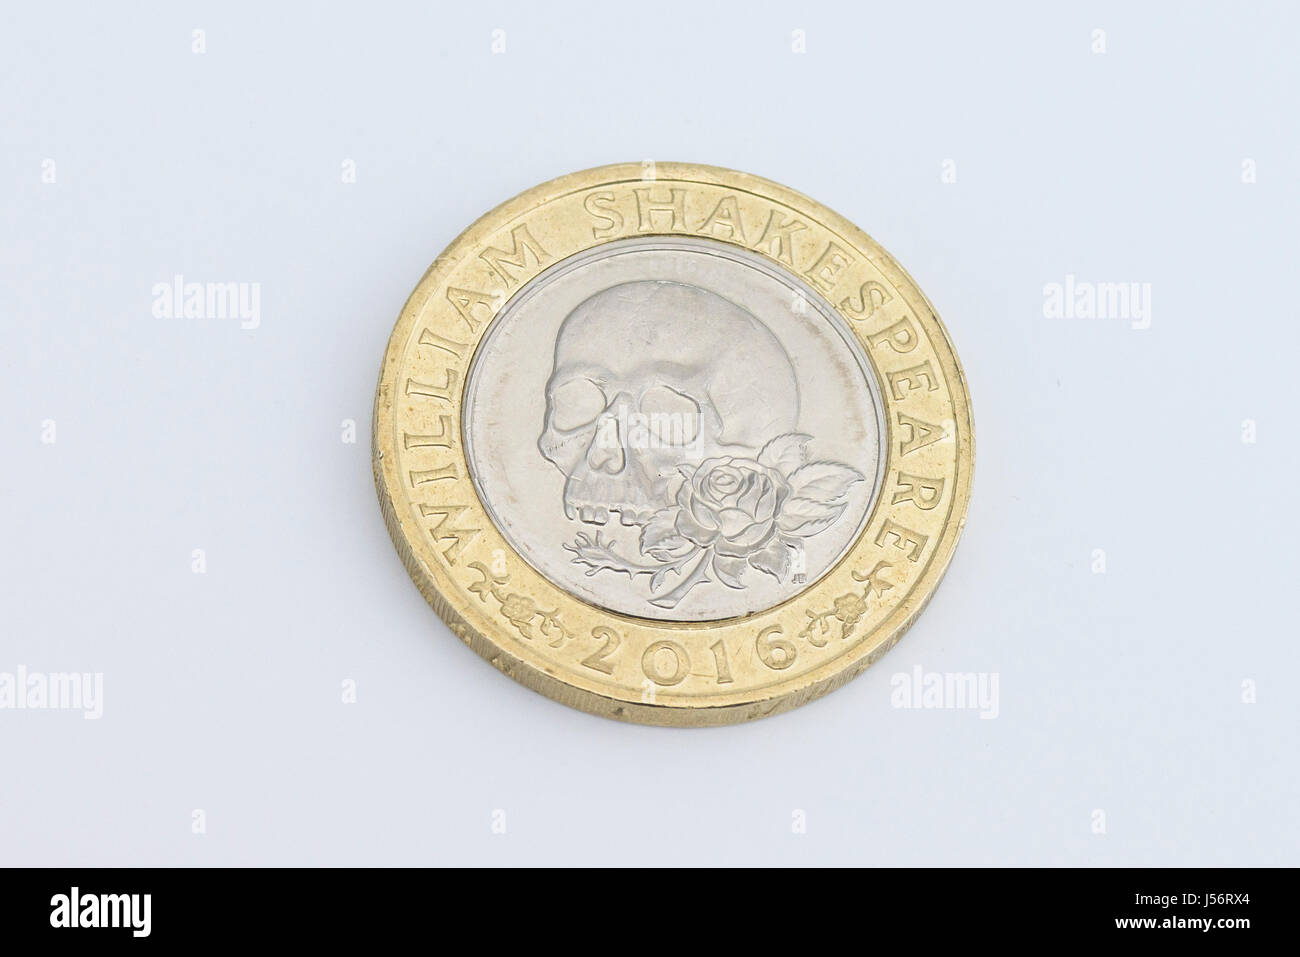 The tails side of a 2016 commemorative £2 coin to mark the anniversary of the death of William Shakespeare Stock Photo